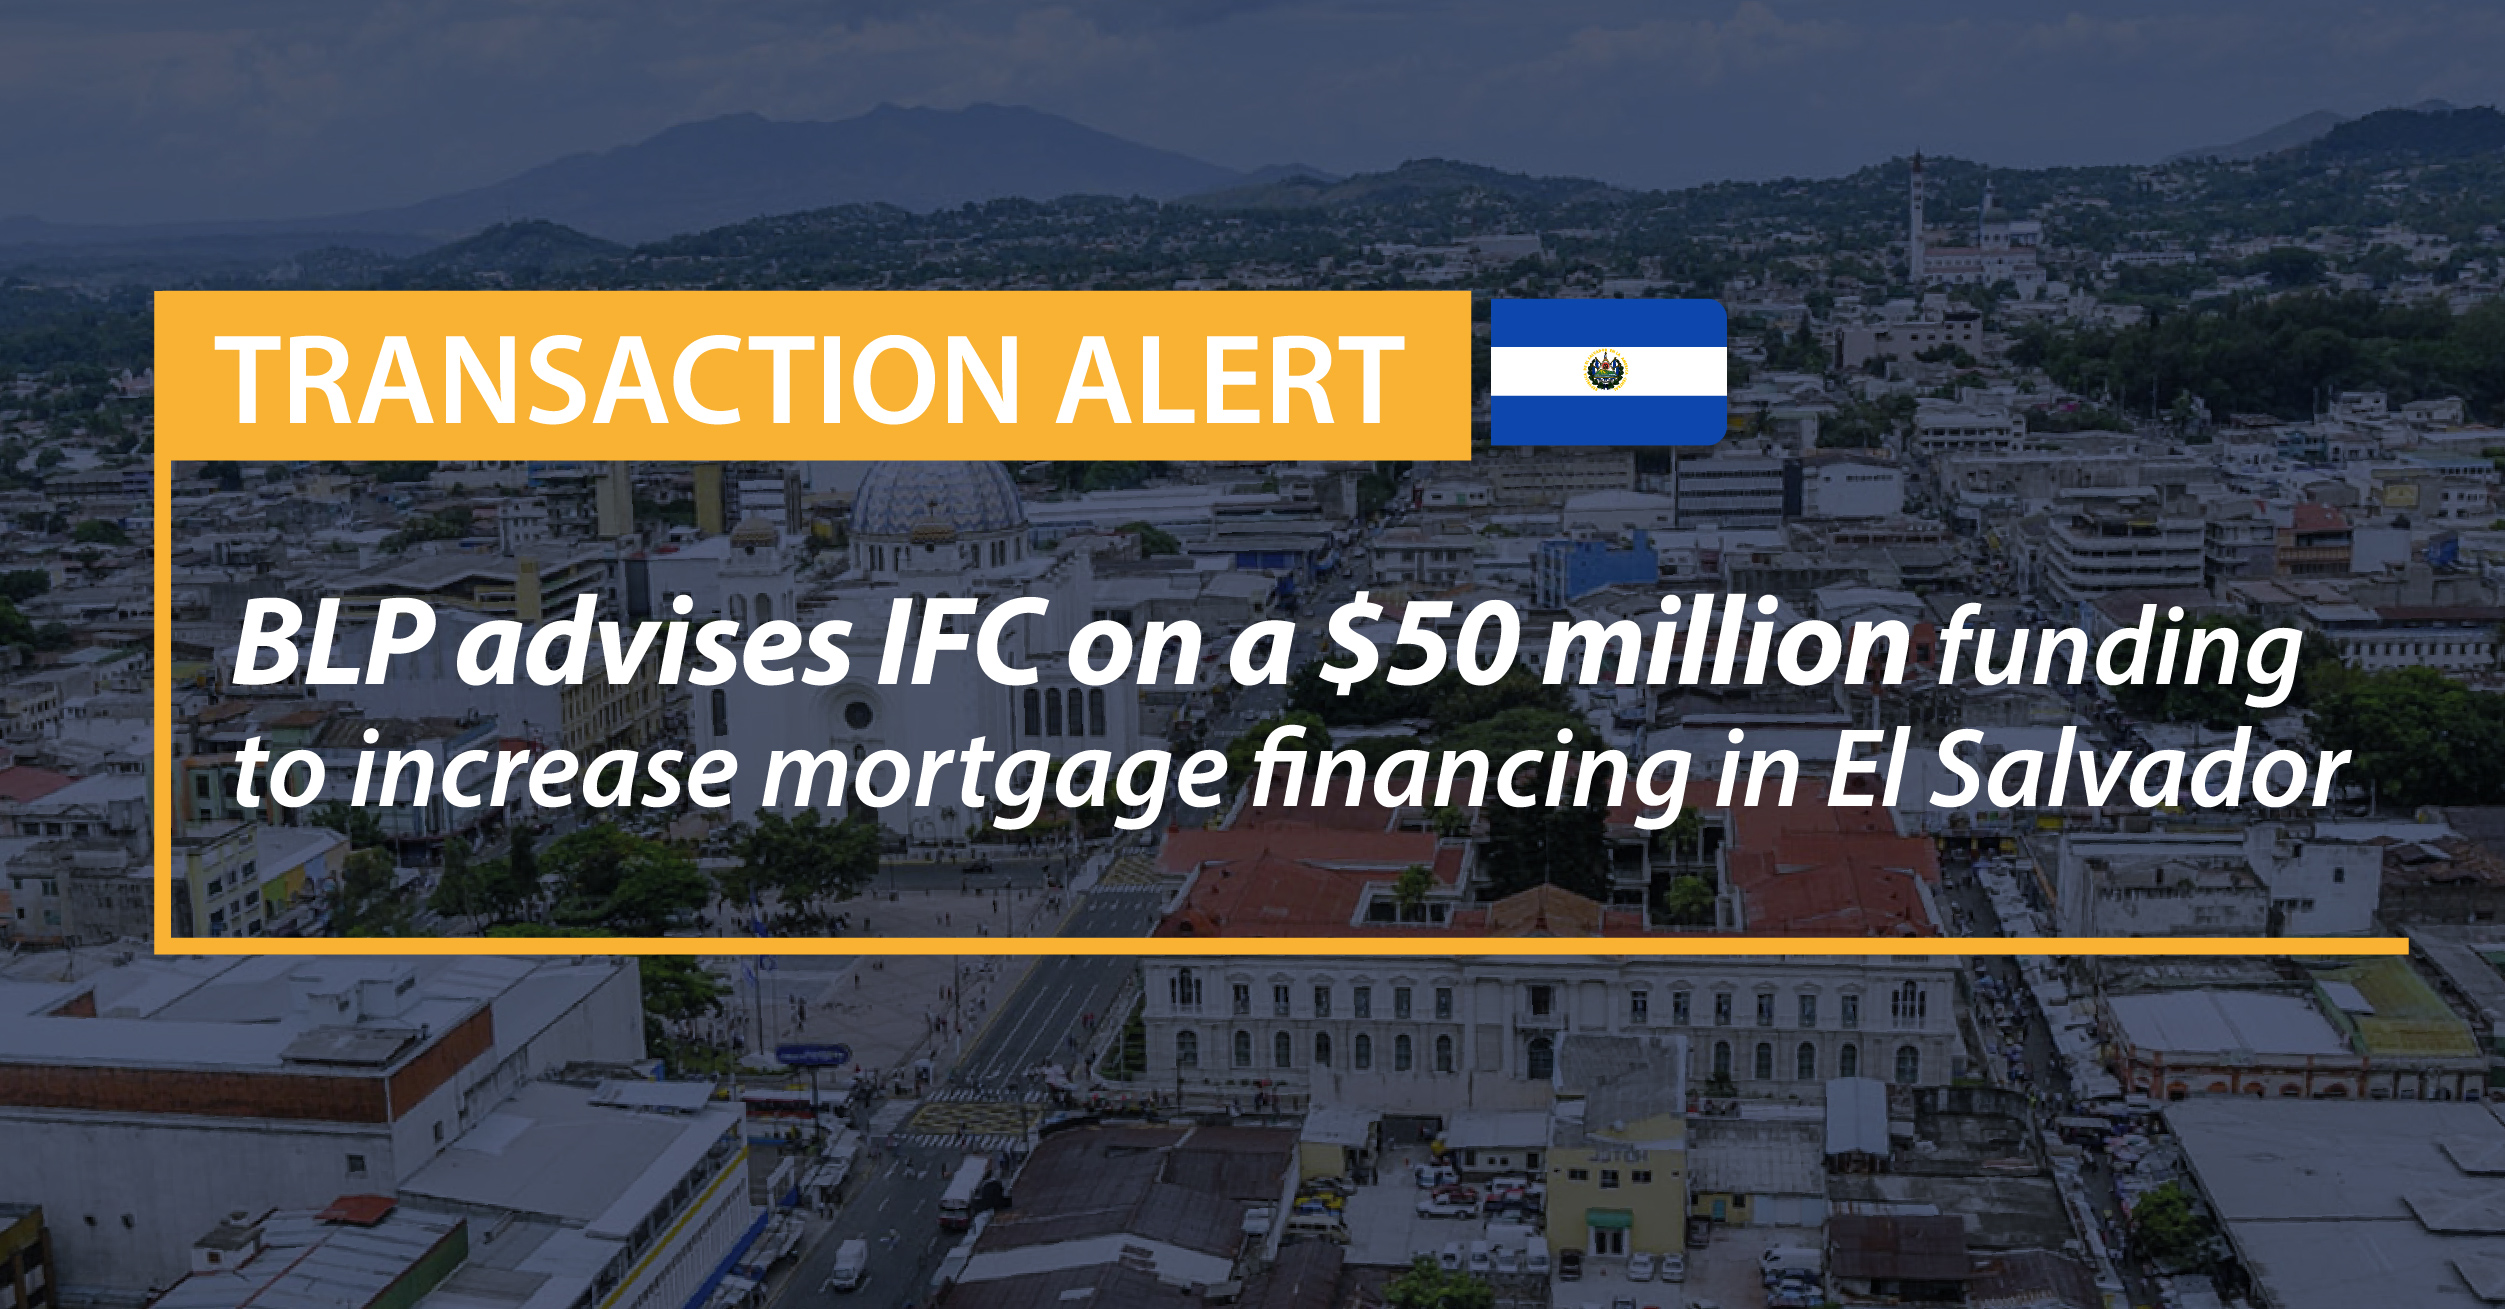 BLP advises IFC on a $50 million funding to increase mortgage financing in El Salvador